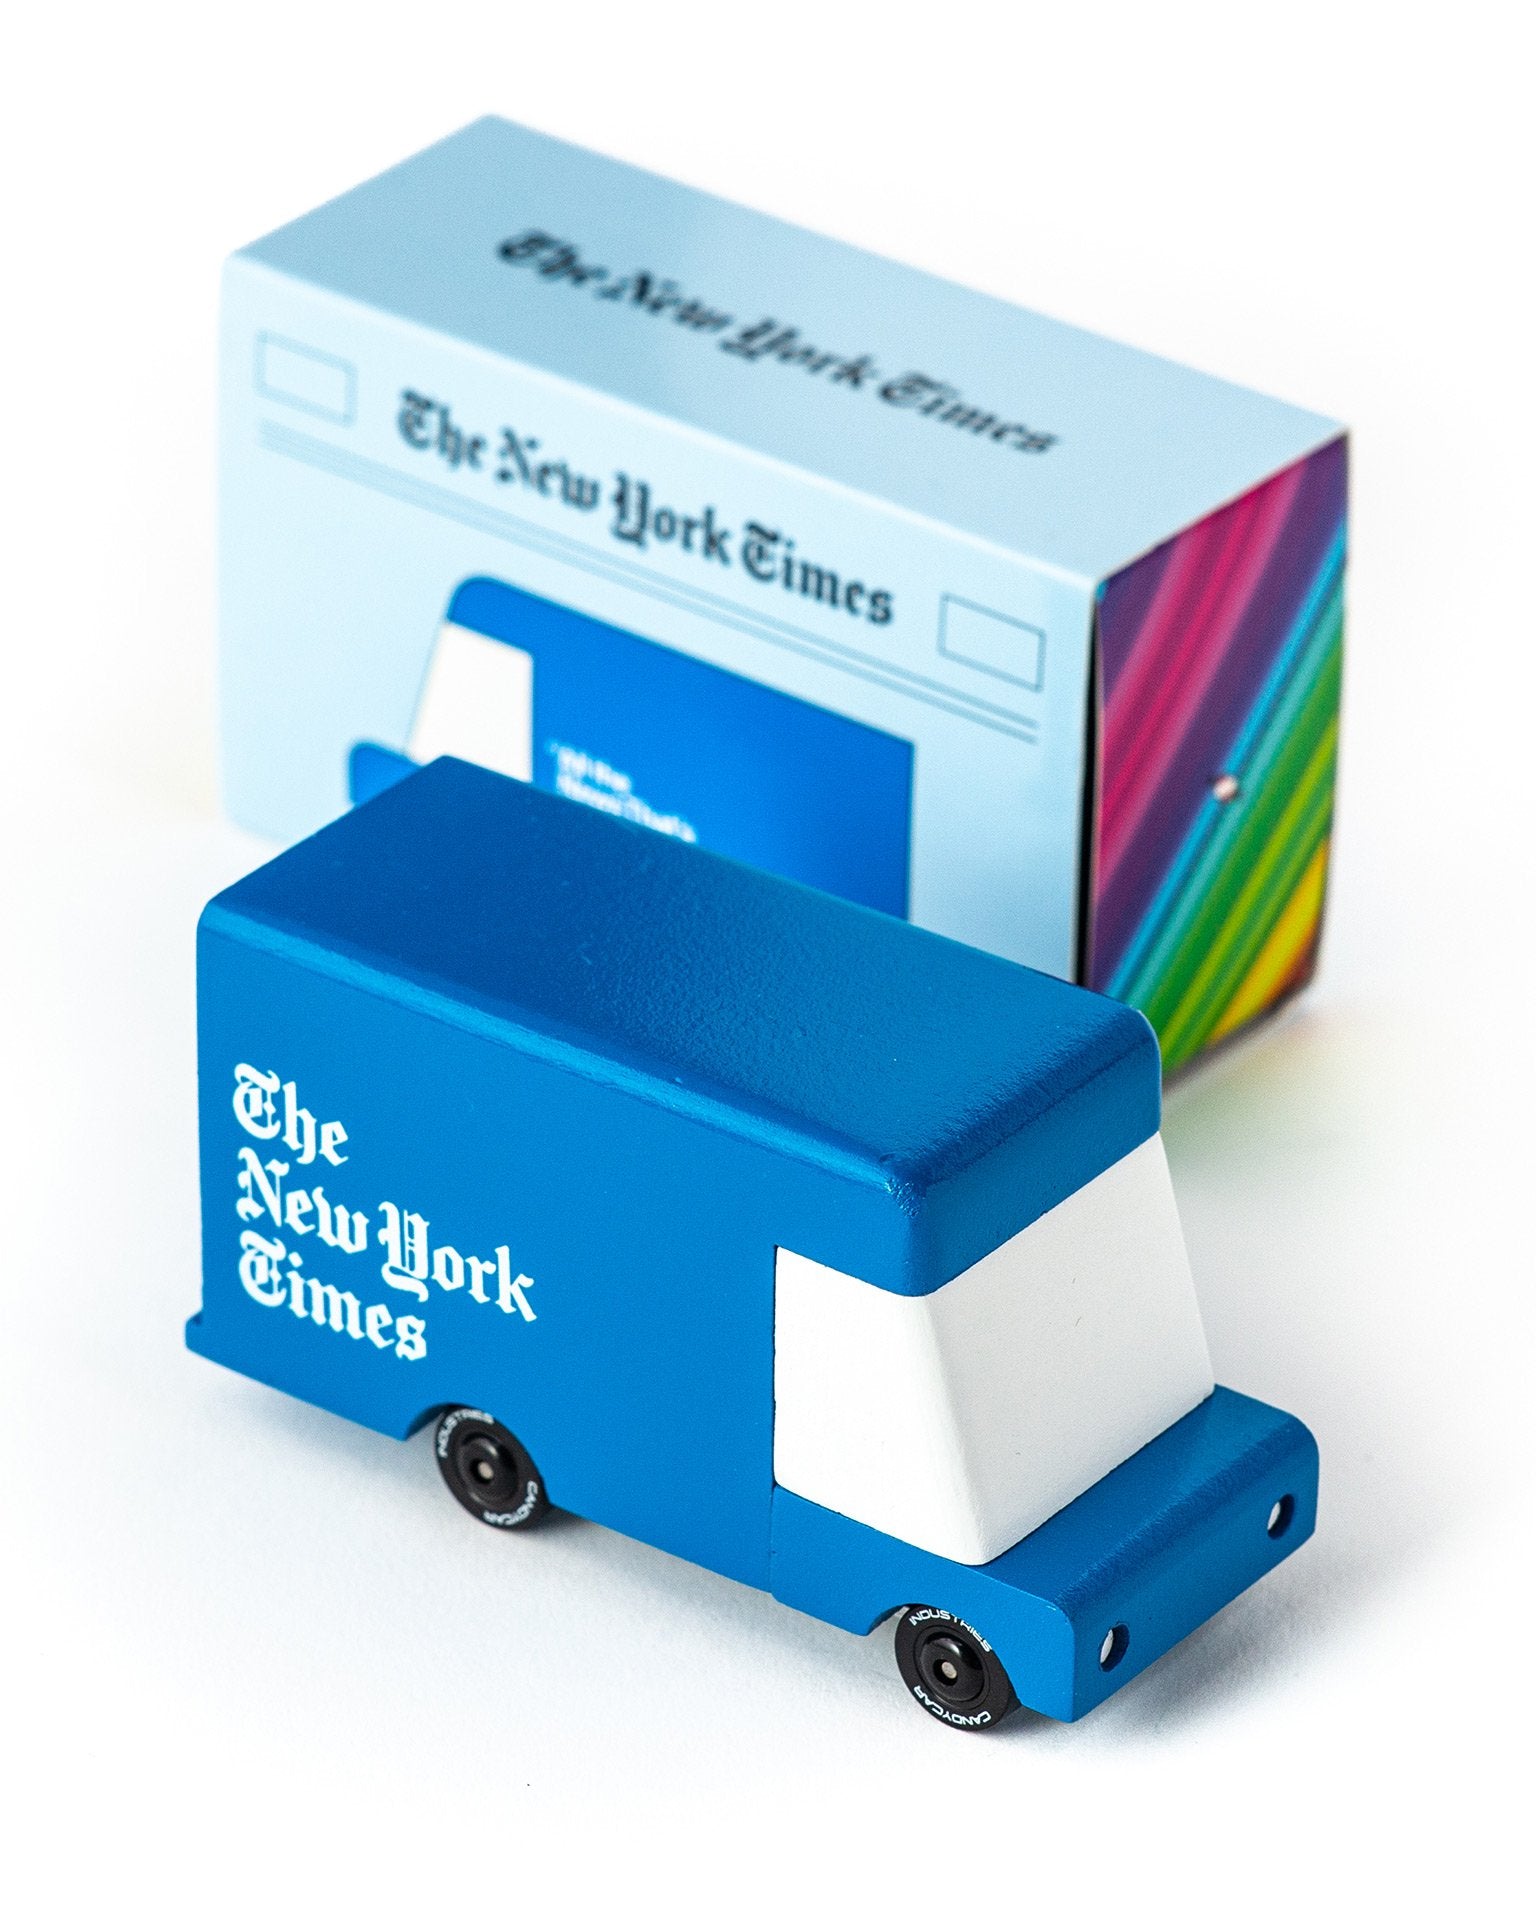 Little candylab play new york times delivery candyvan